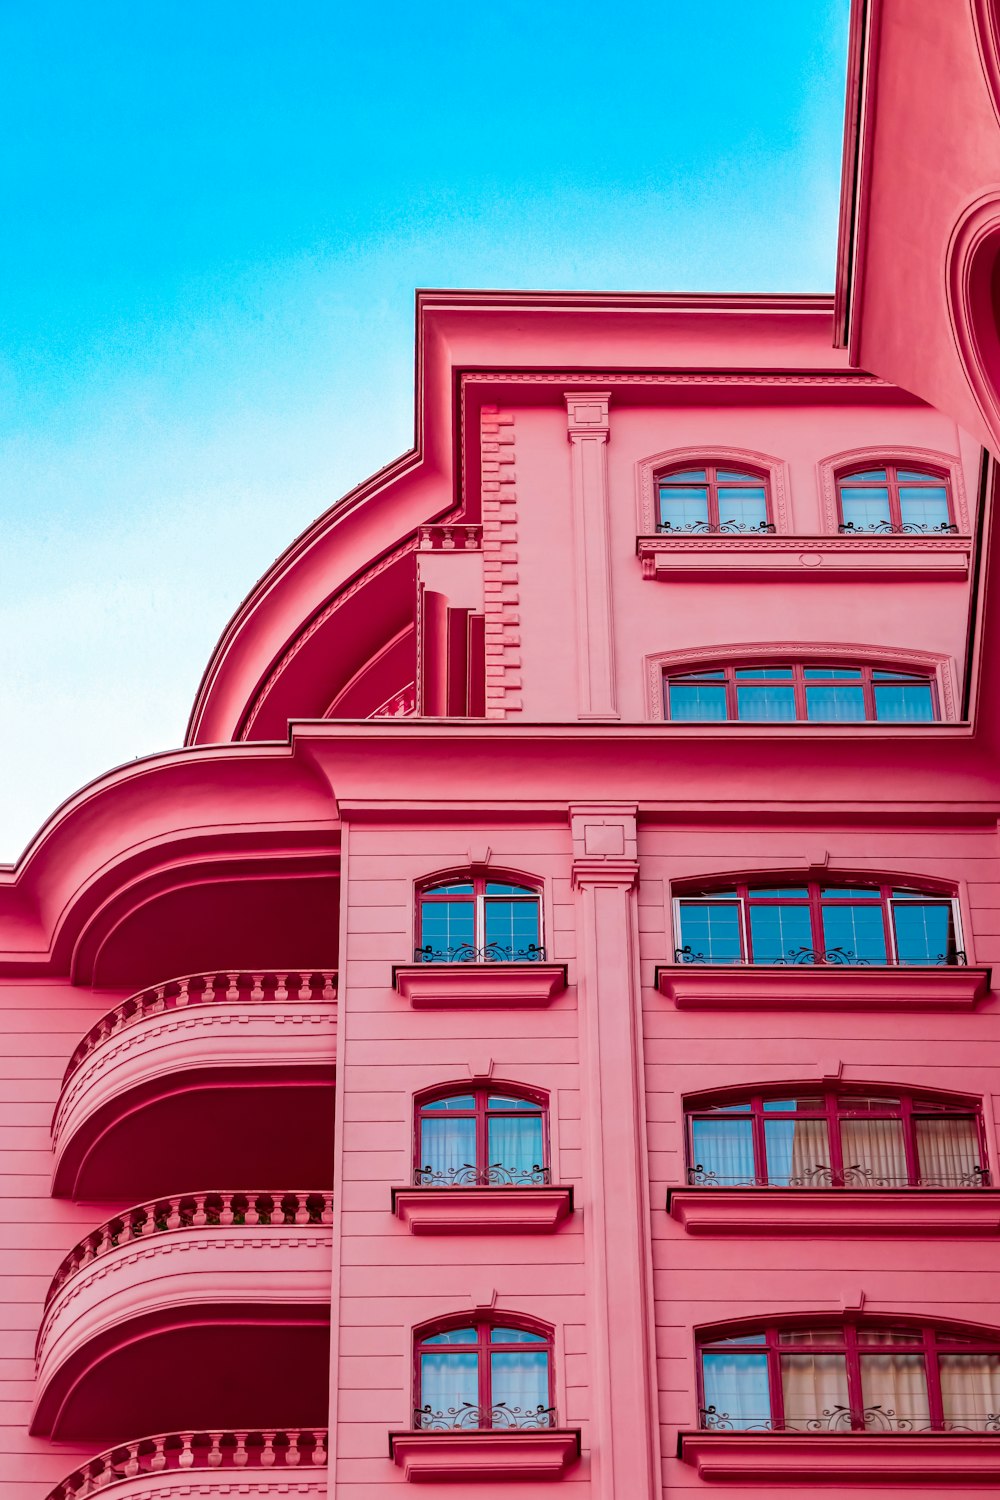 a pink building with balconies and a clock